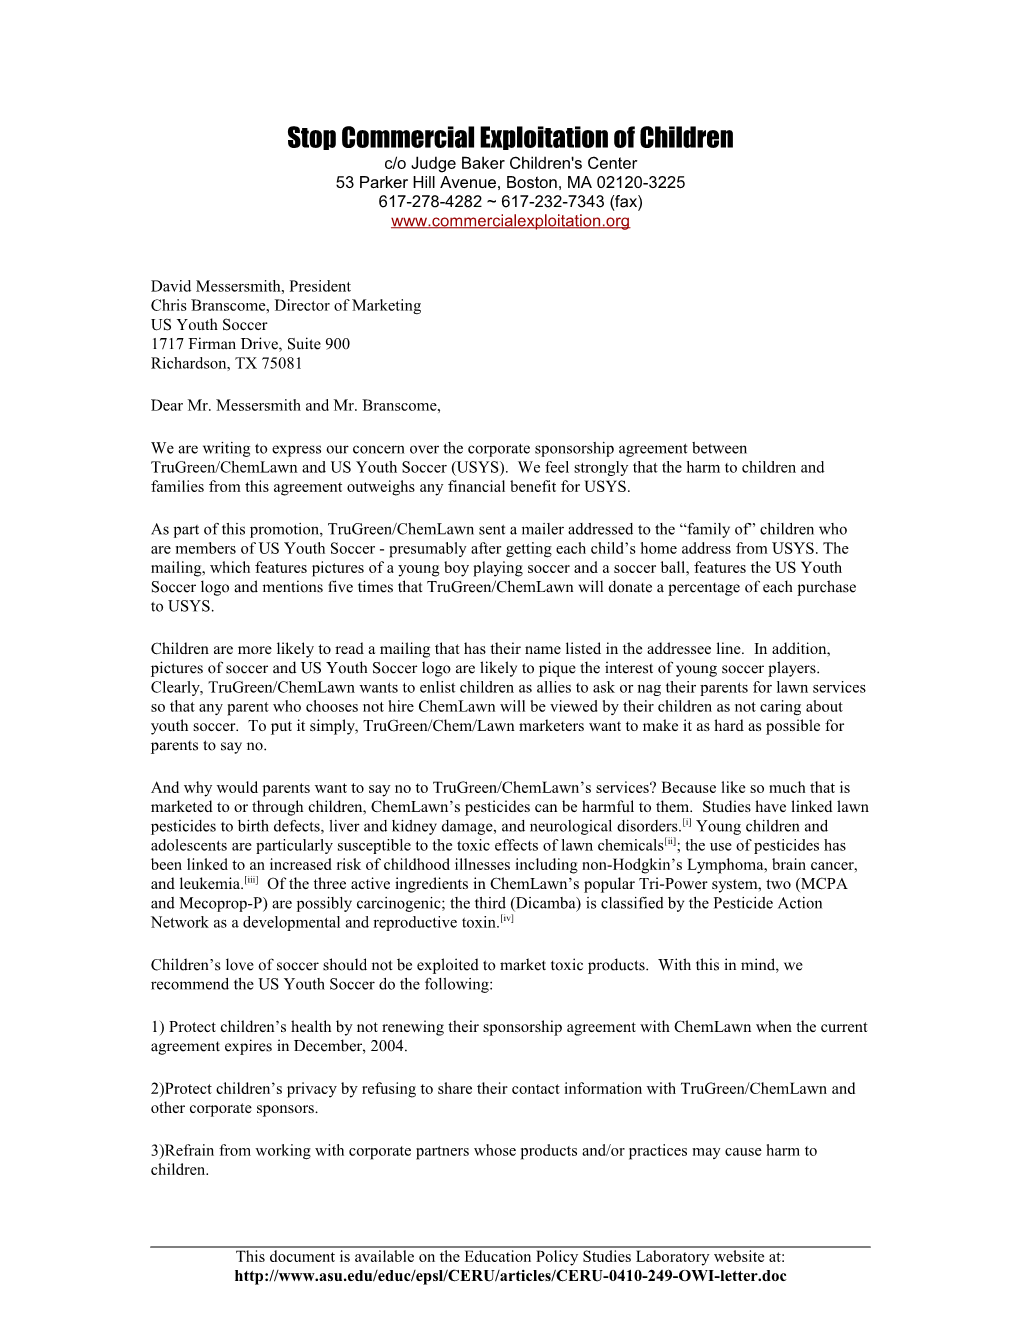 Related Letter: Child and Environmental Advocates Urge US Youth Soccer to Give Trugreen/Chemlawn